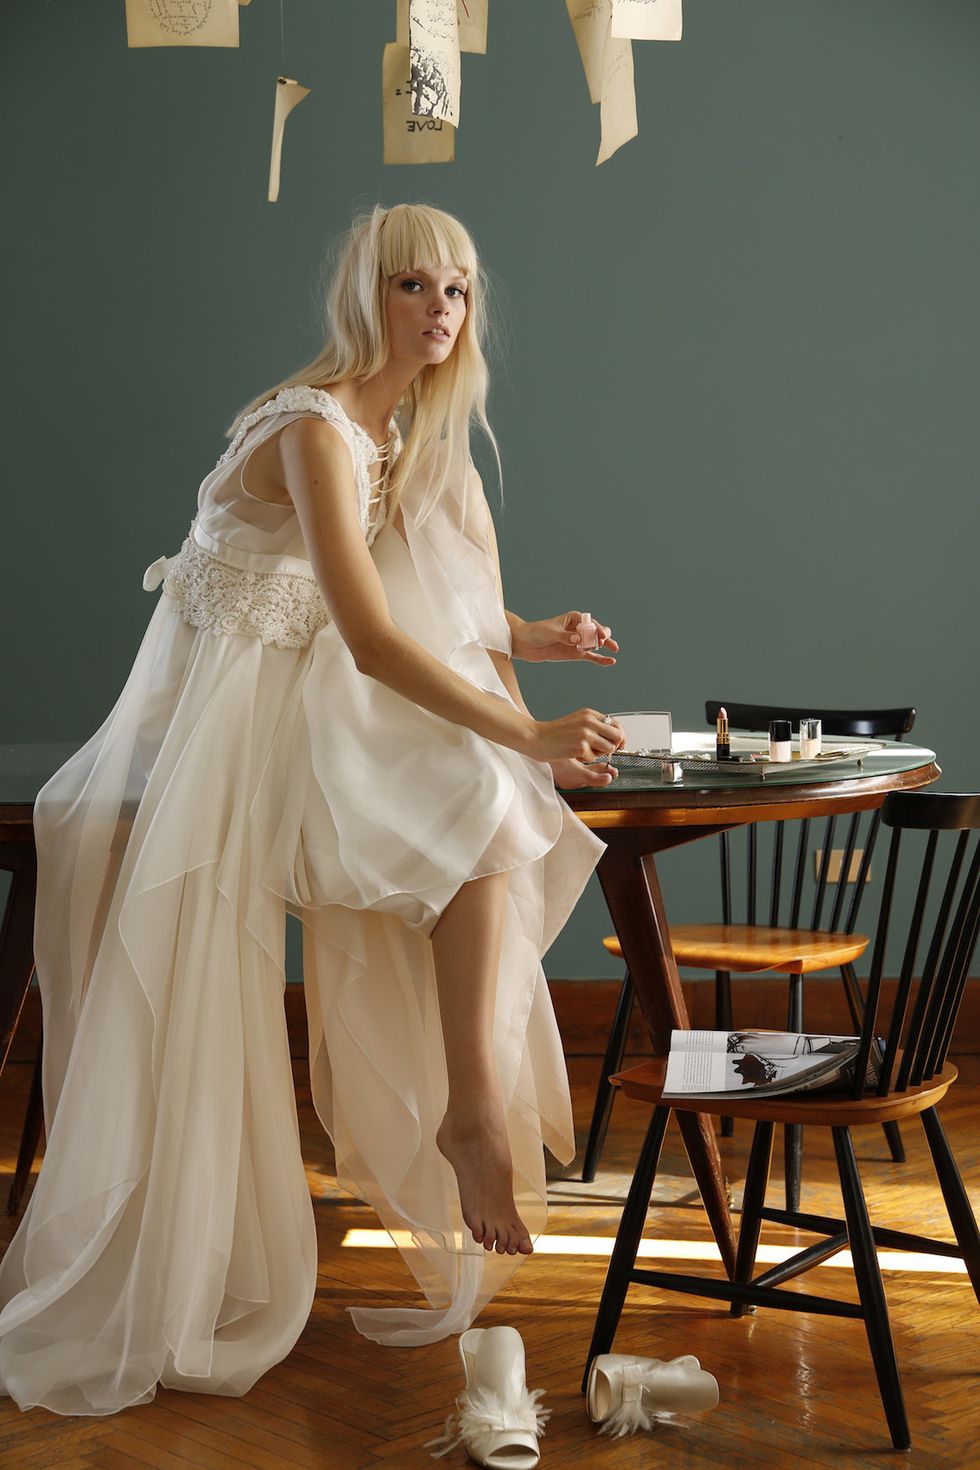 Dress, Sitting, Gown, Long hair, Kitchen & dining room table, Wood flooring, Blond, High heels, Embellishment, Model, 